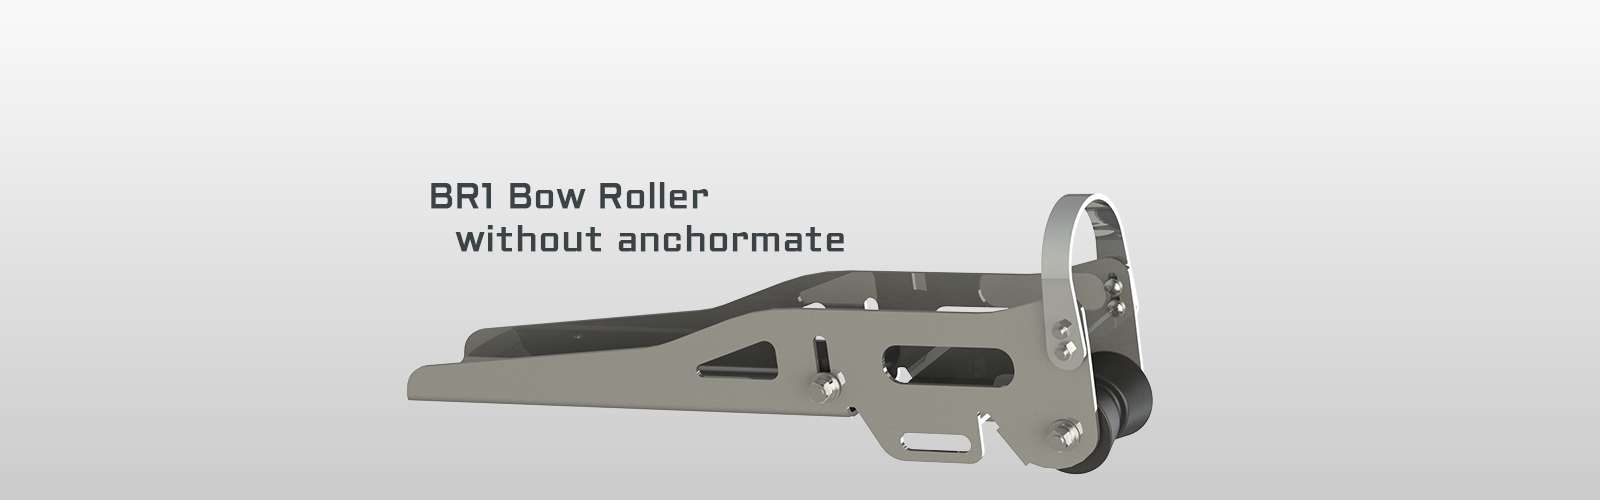 BR1 Bow Roller